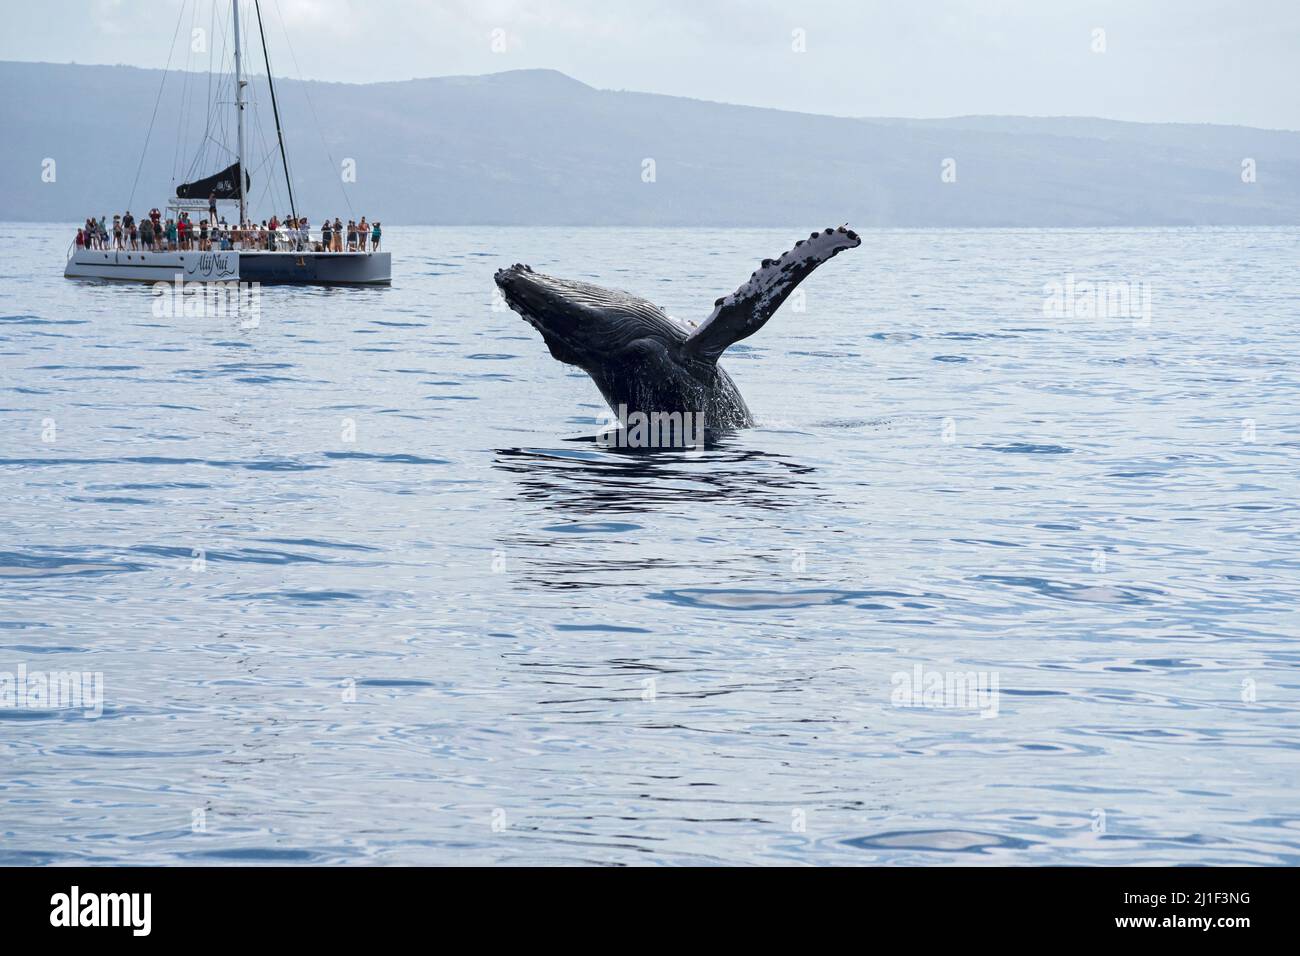 Maui, HI/USA - February 18, 2022: Tourists aboard whale watching boat observe whale breaching in waters of Pacific Ocean off Maui coast. Stock Photo